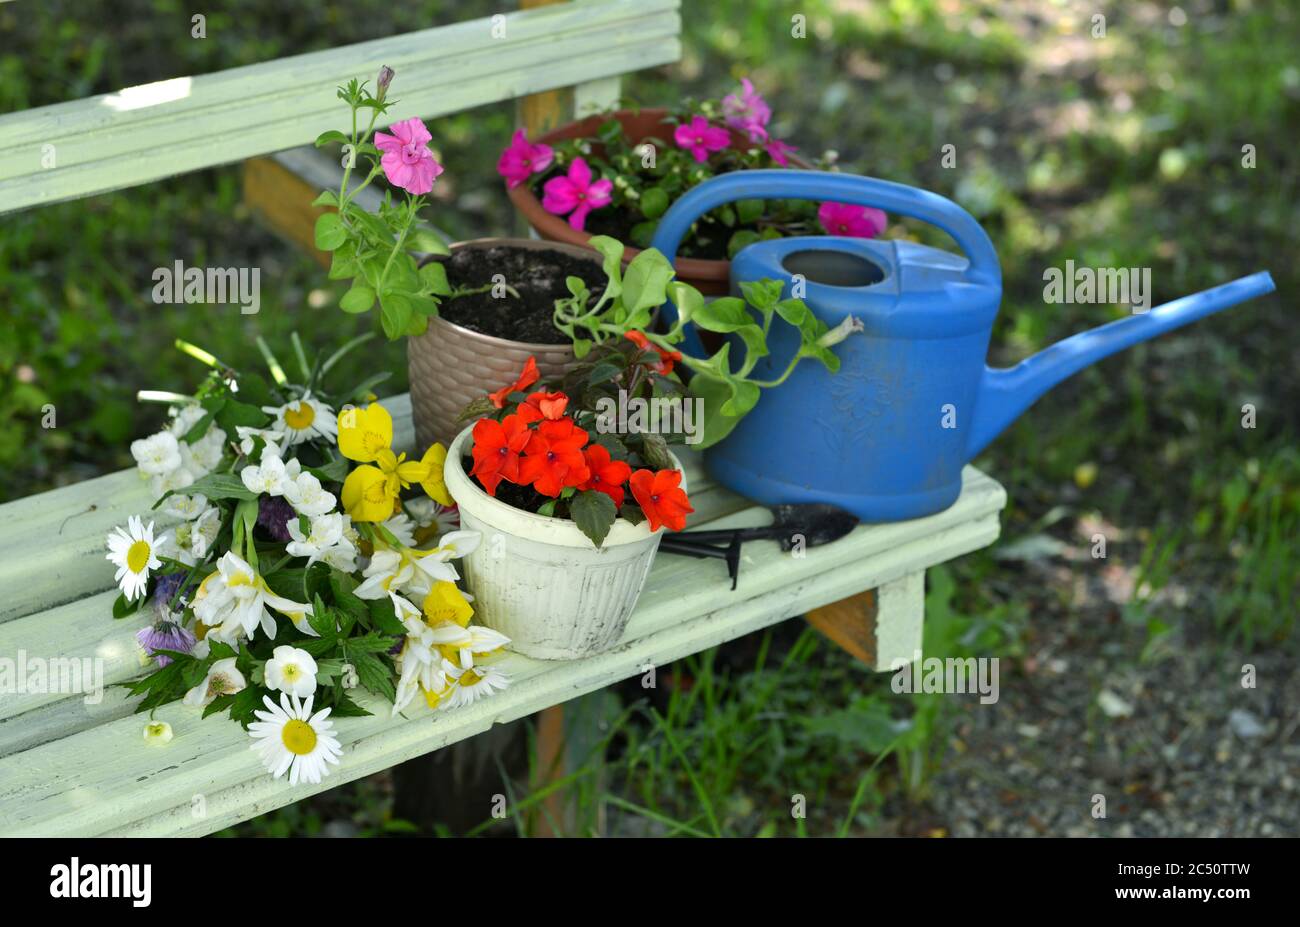 Garden bench with bunch of wild flowers, pots with balsamine sprouts and waterin can. Vintage botanical background with plants, home hobby still life Stock Photo